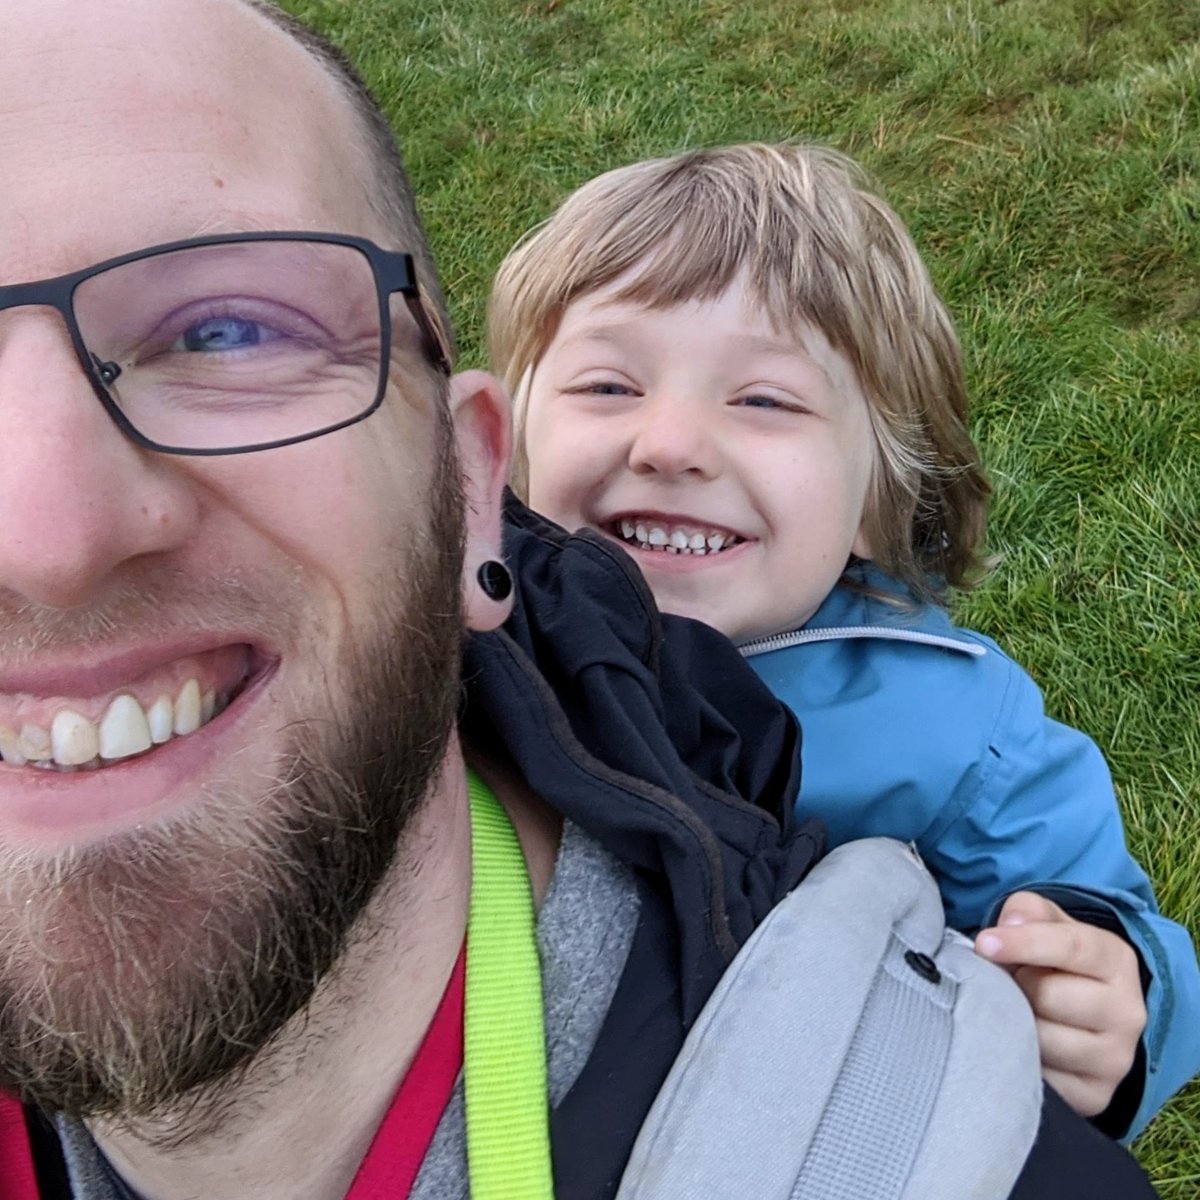 29/9/20, Daddy & Kip time up Sandwell Valley. We laughed so much on this walk.

As #ChildhoodCancerAwarenessMonth draws to a close, the sense of loss is bigger but the reminders of the love we shared is stronger. Hug them while you have them.

#ccam #TeamKip #SmellyPantsWee